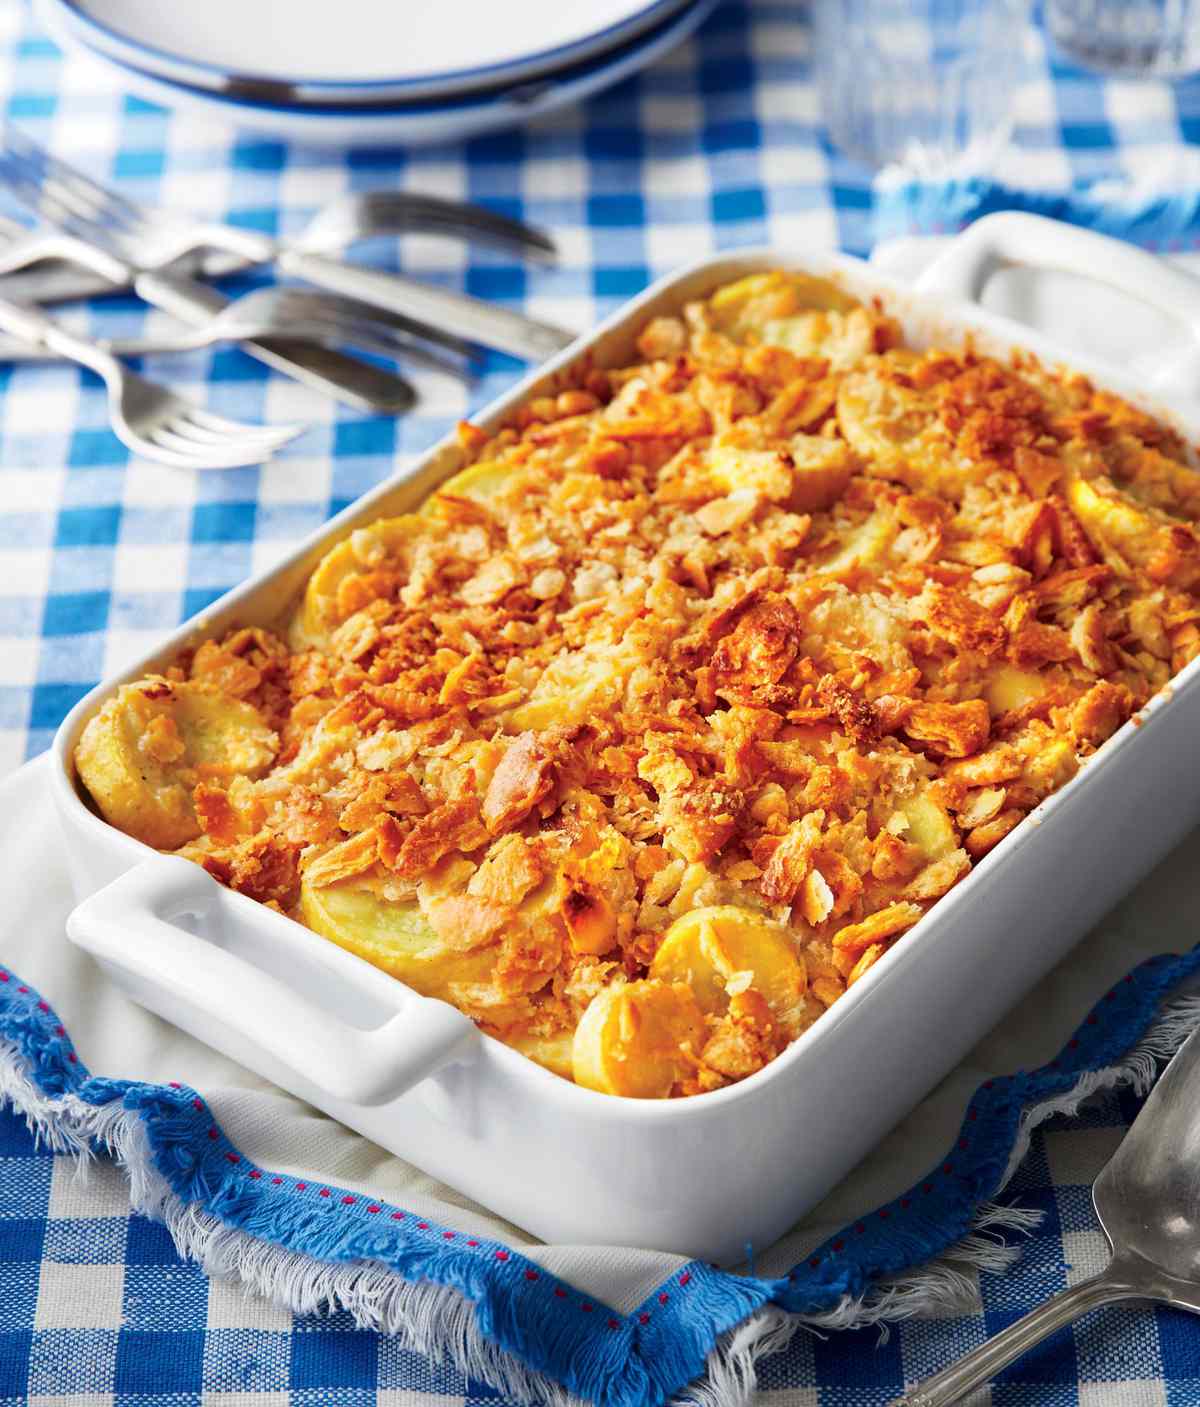 45 Retro Casserole Recipes That Deserve To Be Celebrated | Southern Living